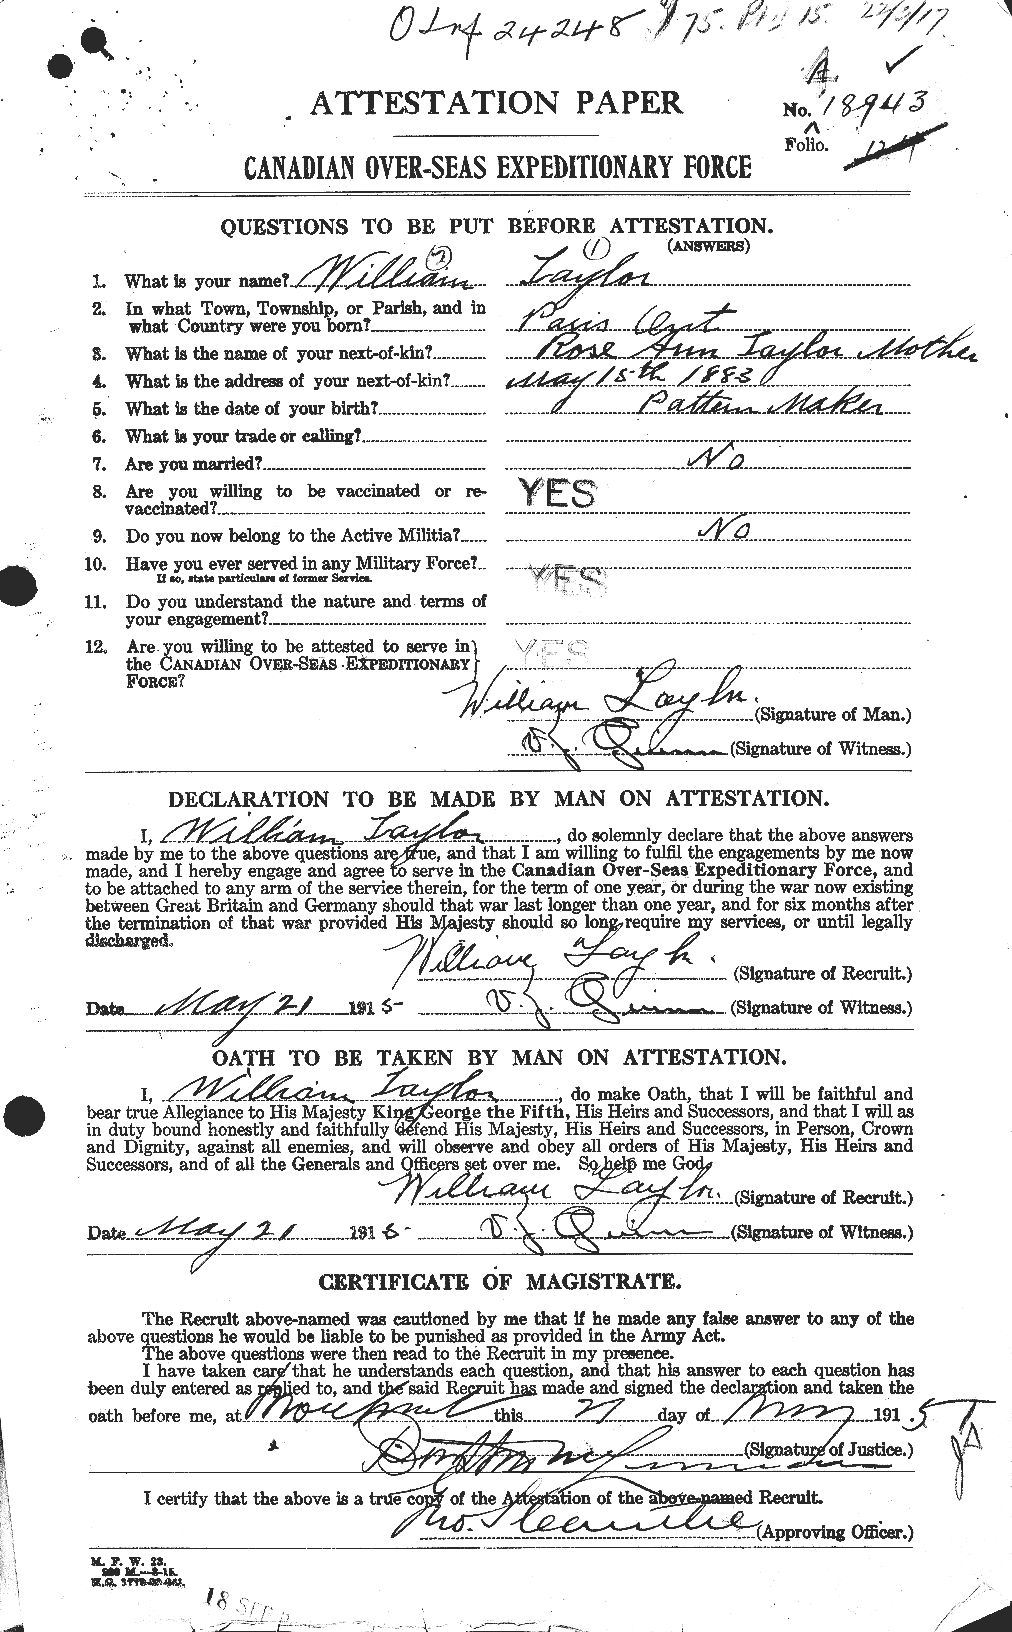 Personnel Records of the First World War - CEF 628132a